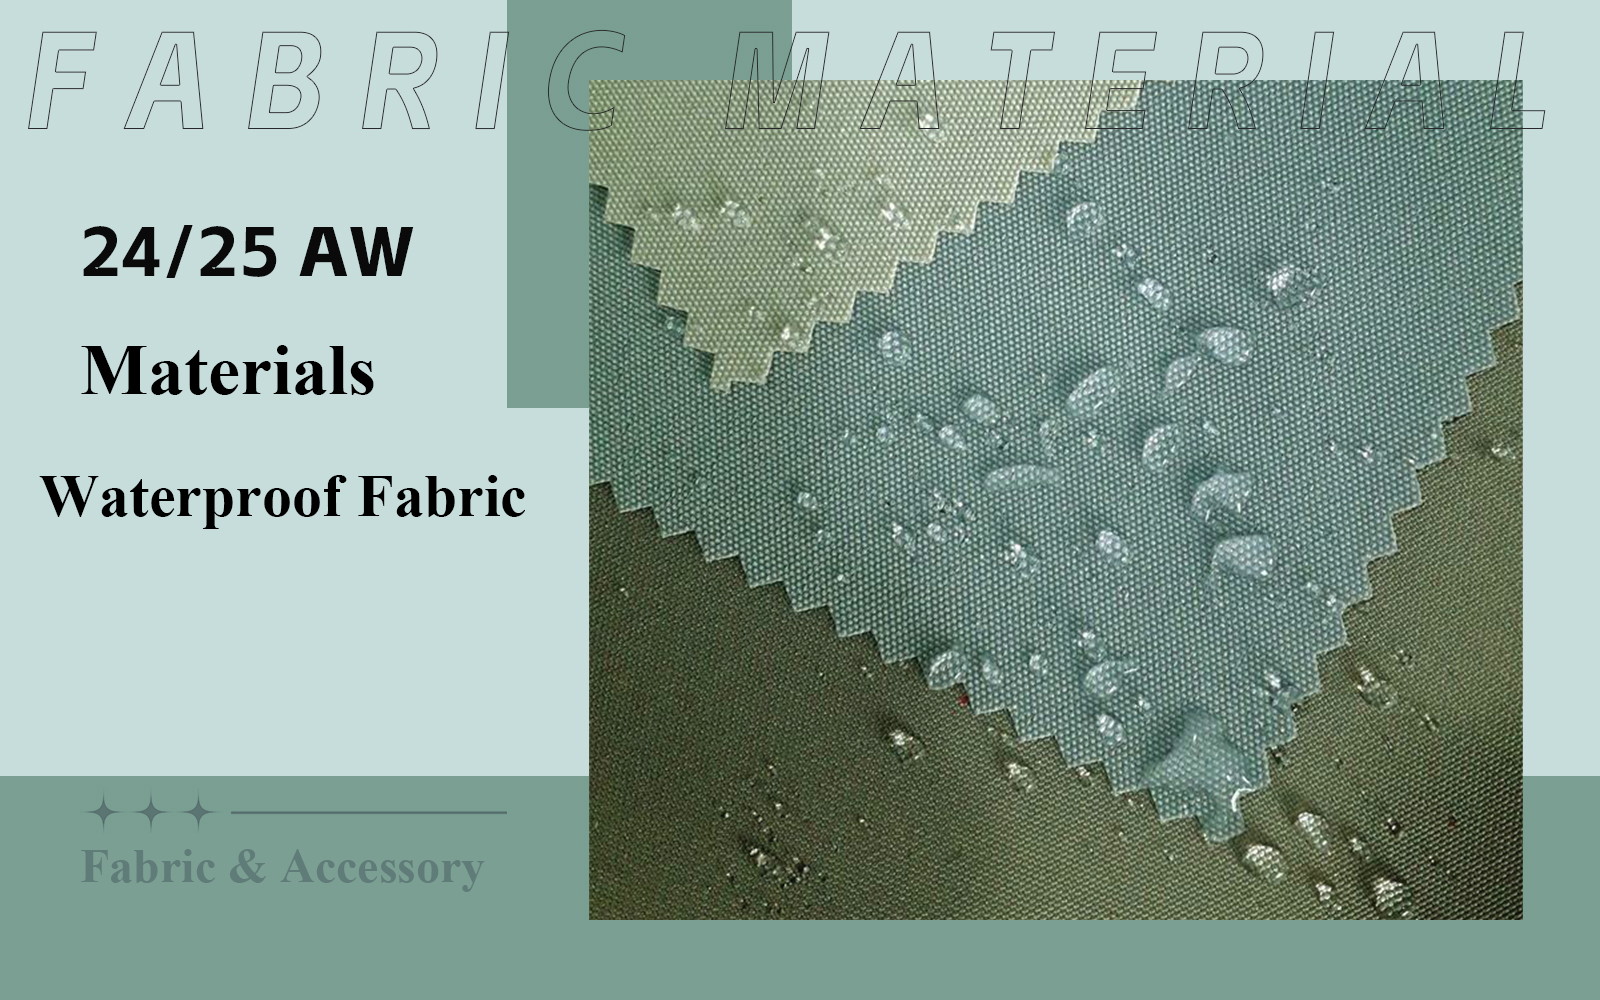 The Material Trend for Outdoor Waterproof Fabric